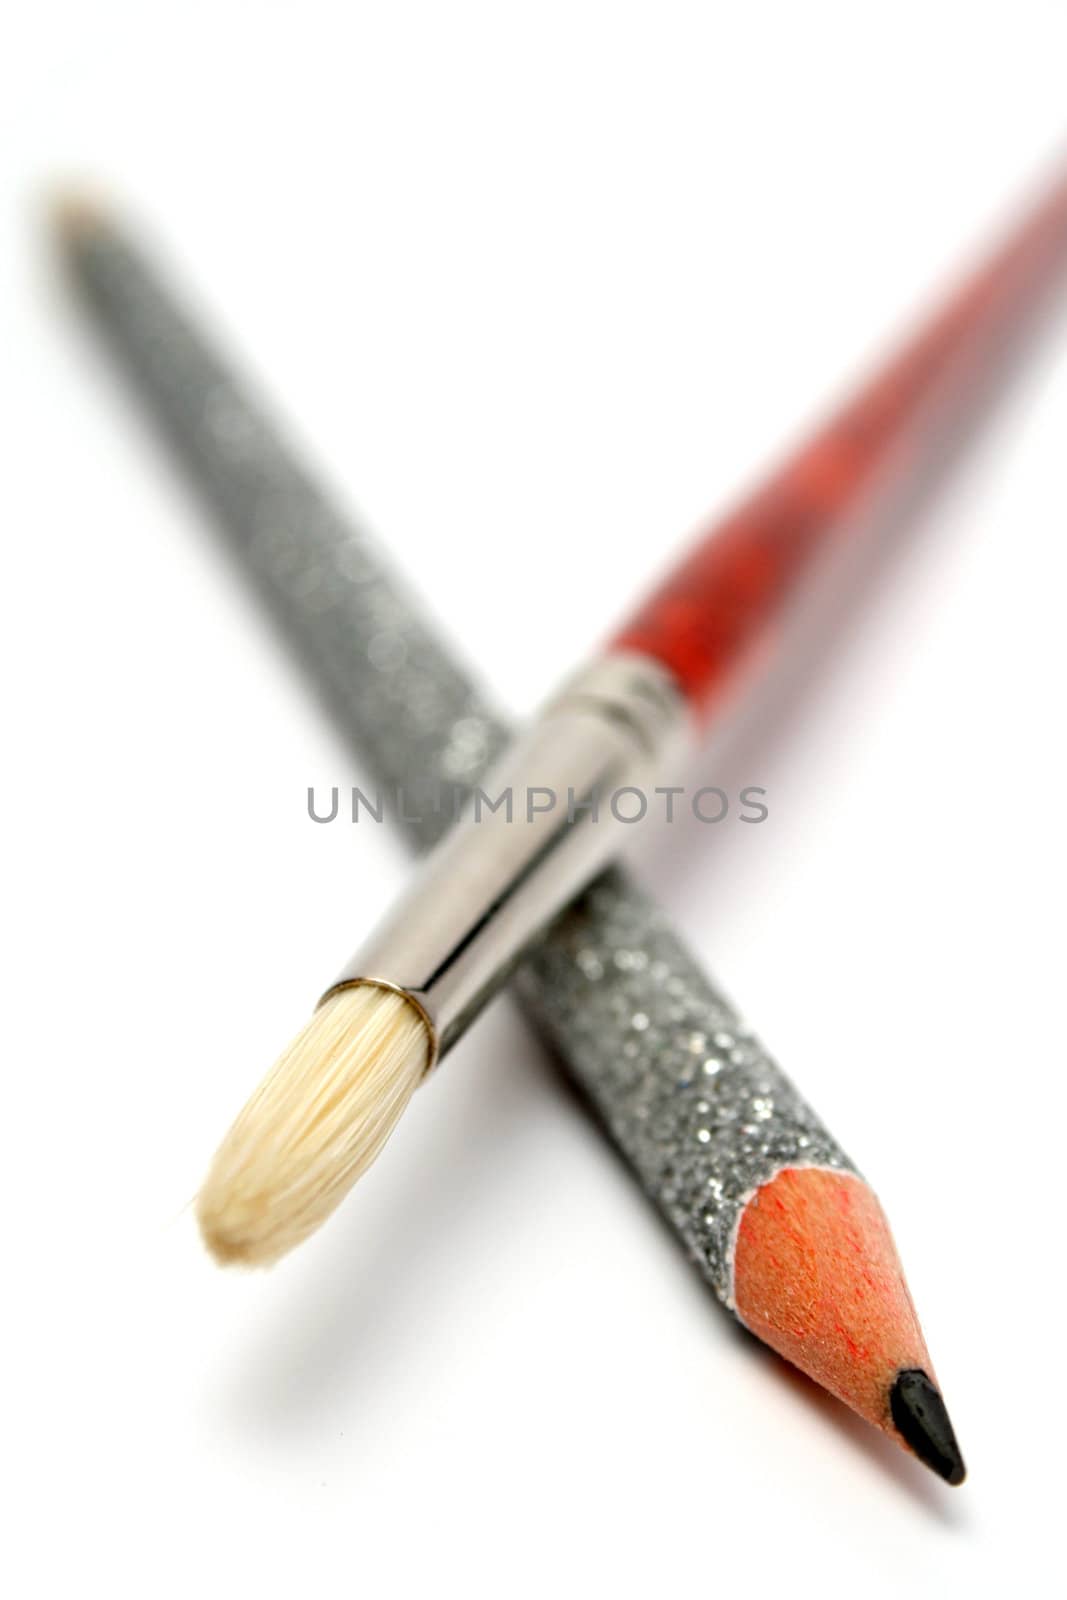 The art brush is crossed with a celebratory brilliant pencil by parrus